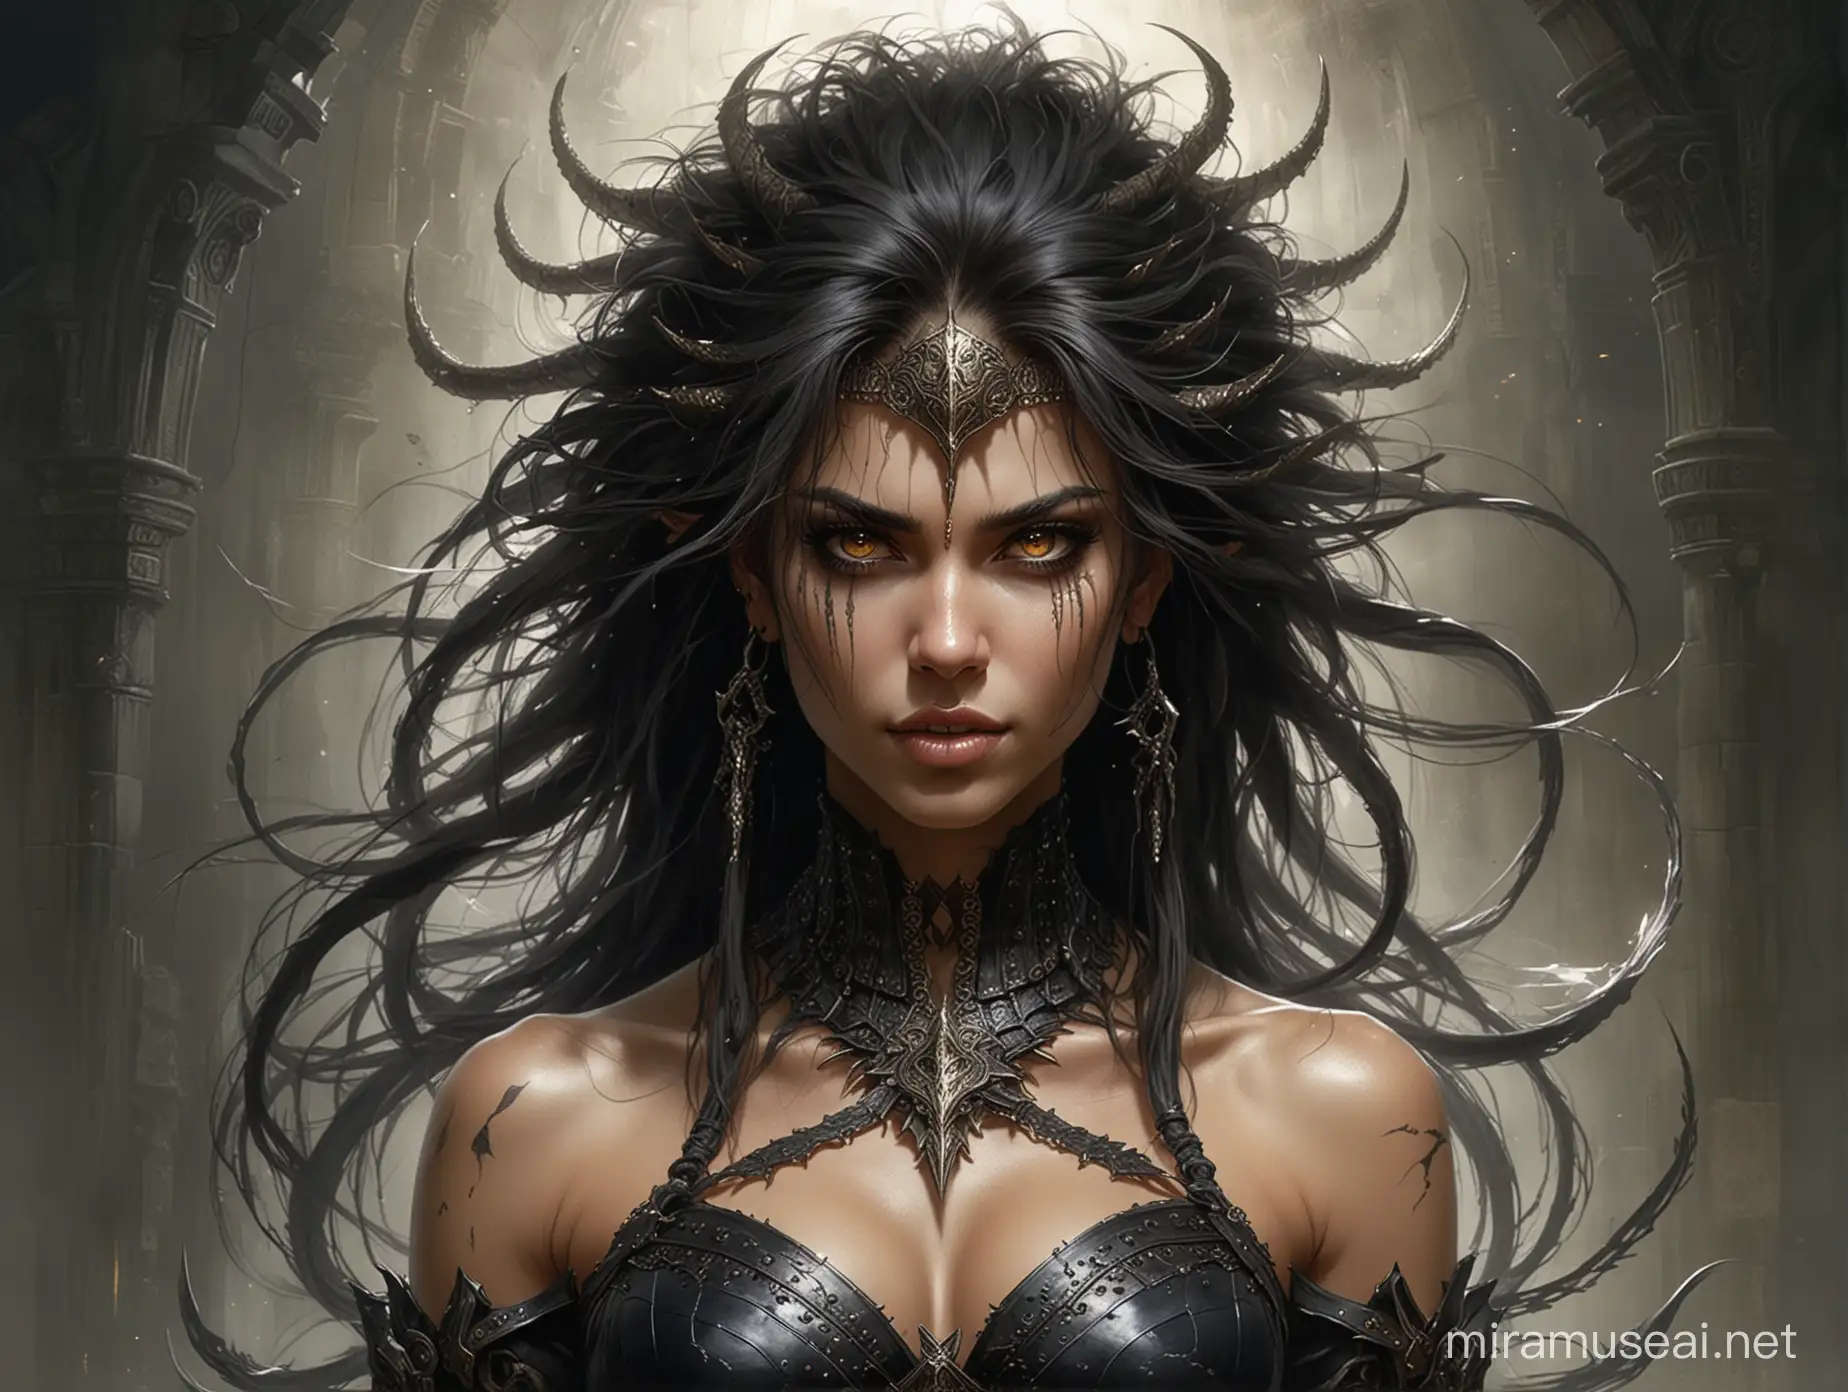 Create a portrait painting of the main antagonist of the demigod, serpentine creature with scales as black as night, glowing eyes like lightning, and razor-sharp teeth. </br> It is impossible to tell its age or gender as it is a mythological creature. 
Style of Medieval fantasy warrior art by Luis Royo. tan, black, tan, blanchedalmond colors. 8K HD.